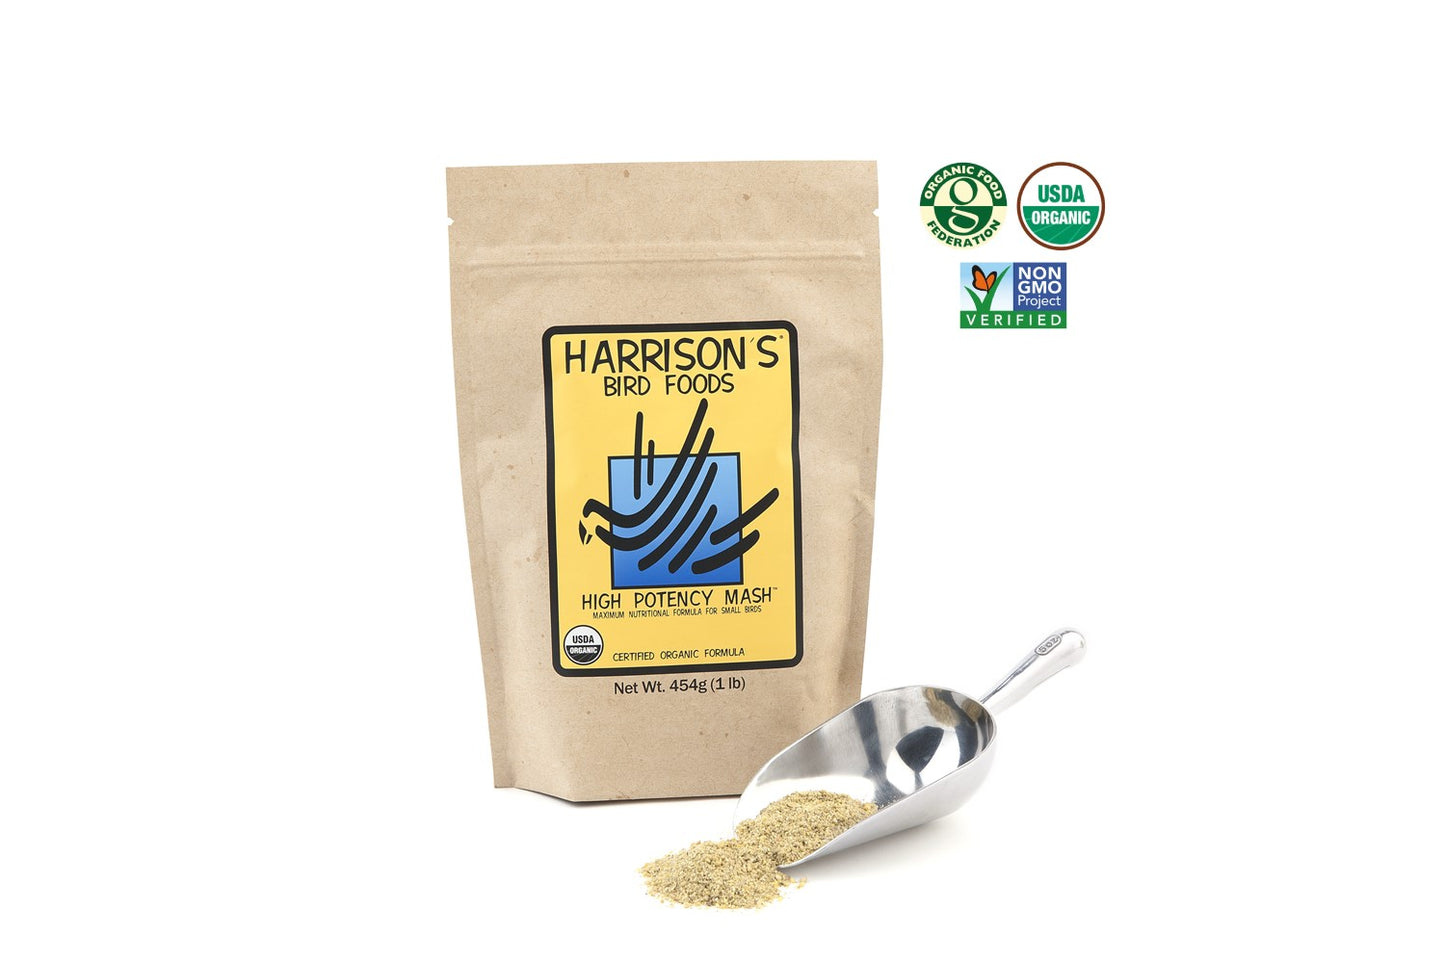 A bag of Harrison's High Potency Mash, next to a metal scoop full of the mash